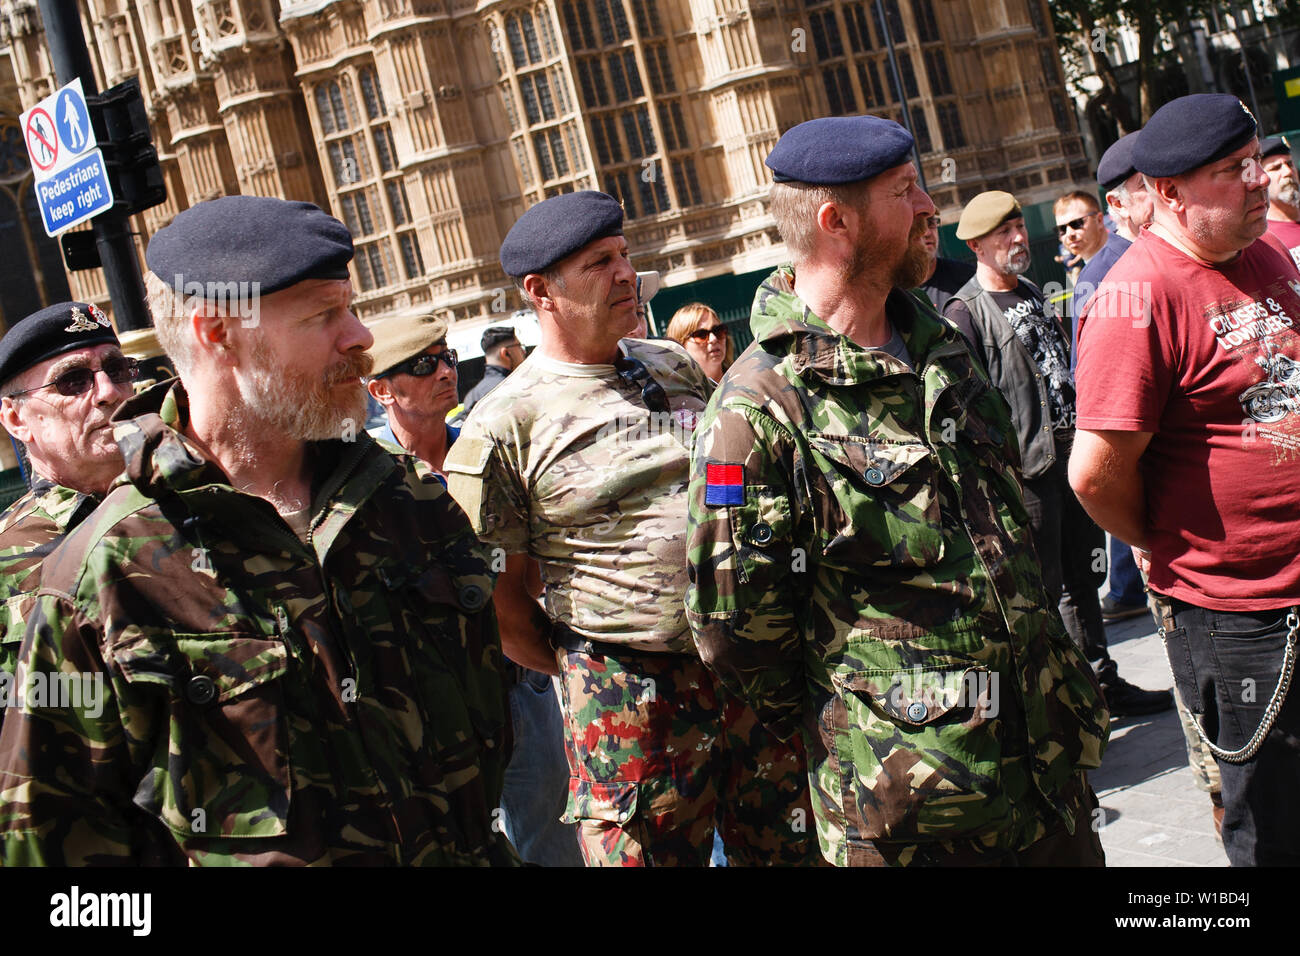 Veterans protesting the prosecution of former British soldiers for wartime killings stand in formation at a demonstration outside the Houses of Parliament. The demonstration centred on the ongoing case of the as-yet-unnamed 'Soldier F', charged with two counts of murder for killings on Bloody Sunday in Londonderry, Northern Ireland, in 1972. Stock Photo